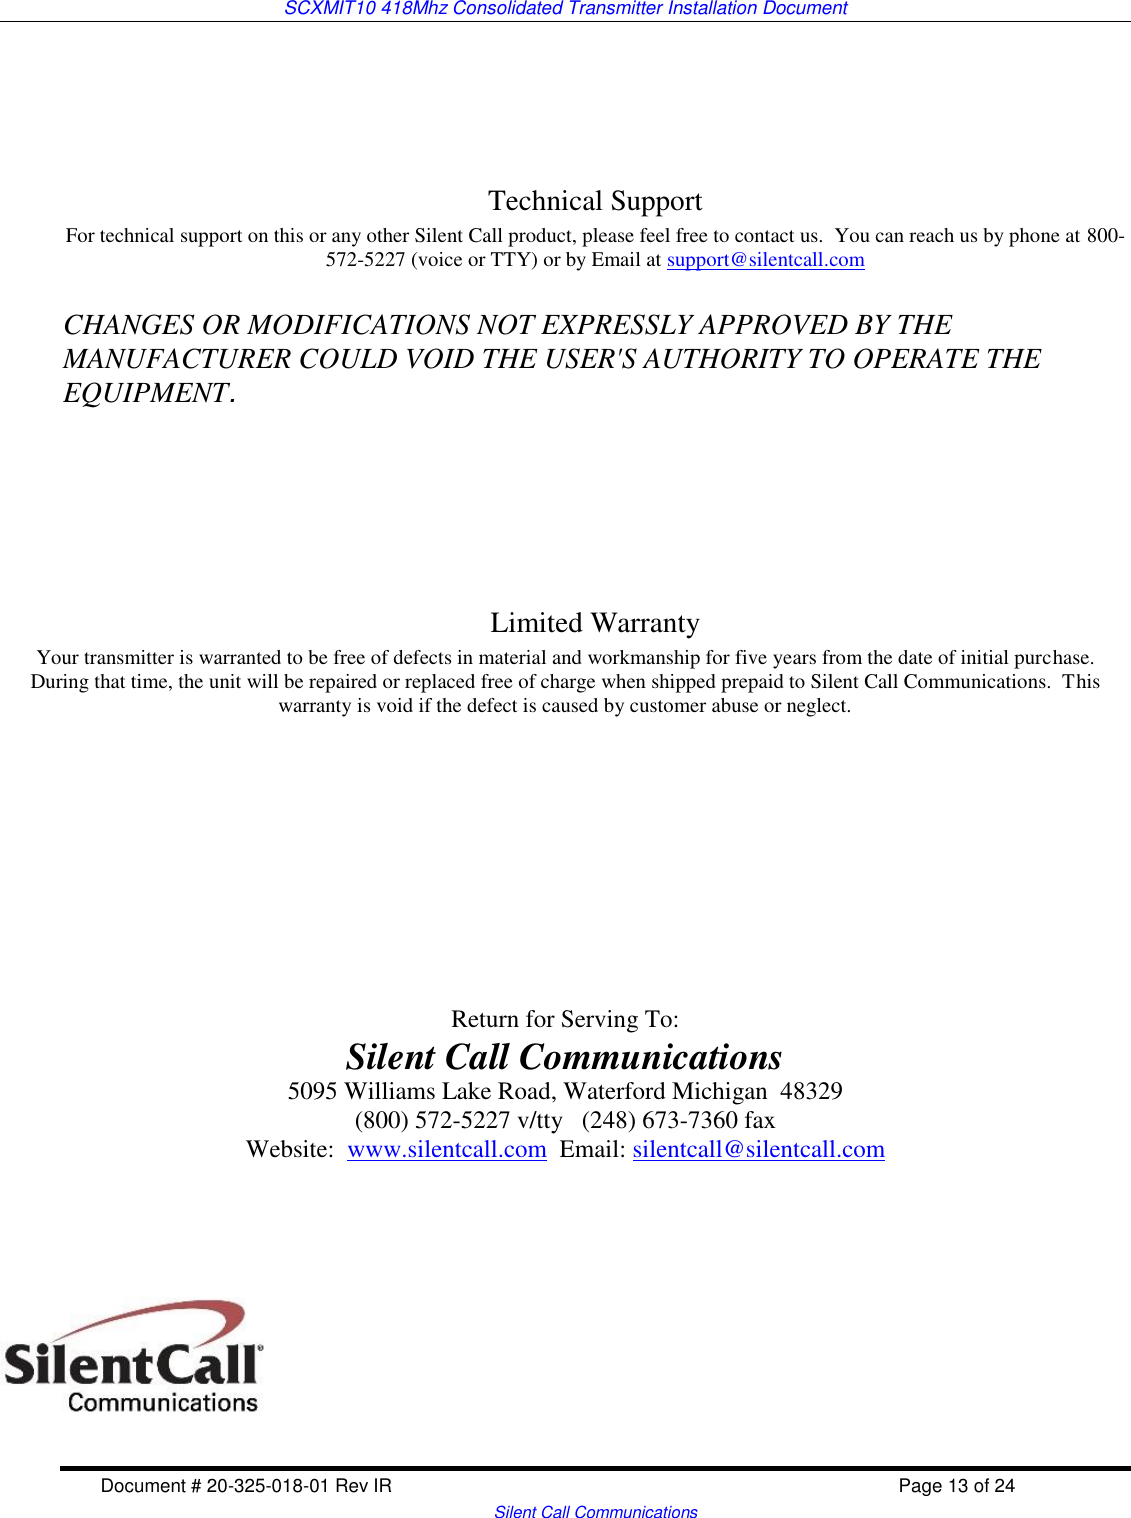 SCXMIT10 418Mhz Consolidated Transmitter Installation Document  Document # 20-325-018-01 Rev IR    Page 13 of 24   Silent Call Communications     Technical Support For technical support on this or any other Silent Call product, please feel free to contact us.  You can reach us by phone at 800-572-5227 (voice or TTY) or by Email at support@silentcall.com  CHANGES OR MODIFICATIONS NOT EXPRESSLY APPROVED BY THE MANUFACTURER COULD VOID THE USER&apos;S AUTHORITY TO OPERATE THE EQUIPMENT.       Limited Warranty Your transmitter is warranted to be free of defects in material and workmanship for five years from the date of initial purchase.  During that time, the unit will be repaired or replaced free of charge when shipped prepaid to Silent Call Communications.  This warranty is void if the defect is caused by customer abuse or neglect.             Return for Serving To: Silent Call Communications 5095 Williams Lake Road, Waterford Michigan  48329 (800) 572-5227 v/tty   (248) 673-7360 fax Website:  www.silentcall.com  Email: silentcall@silentcall.com         